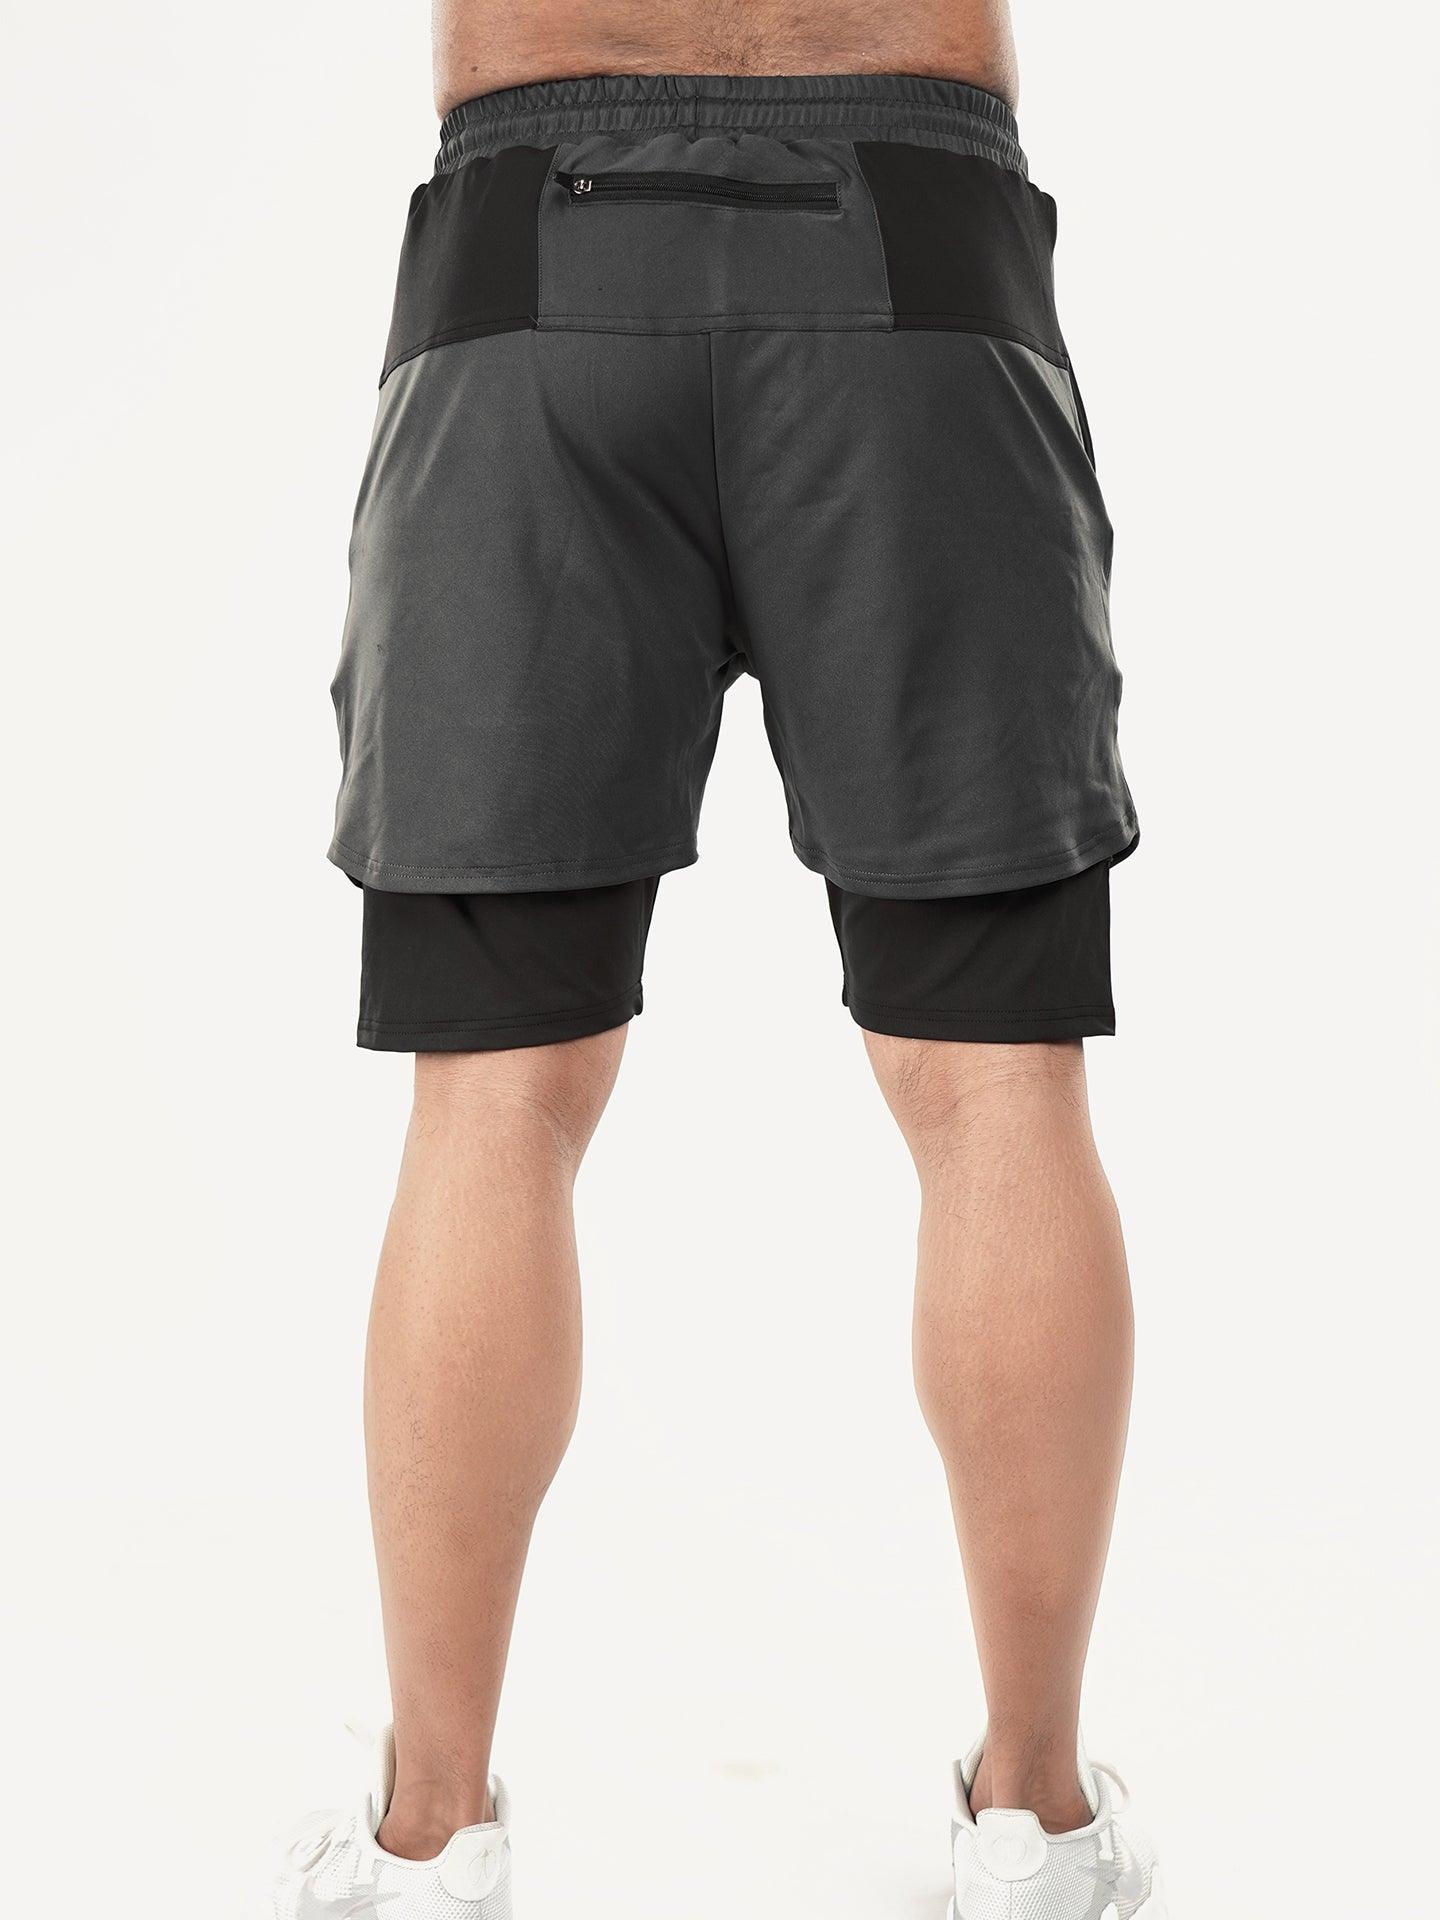 2-in-1 Shorts with phone pocket: Charcoal Grey